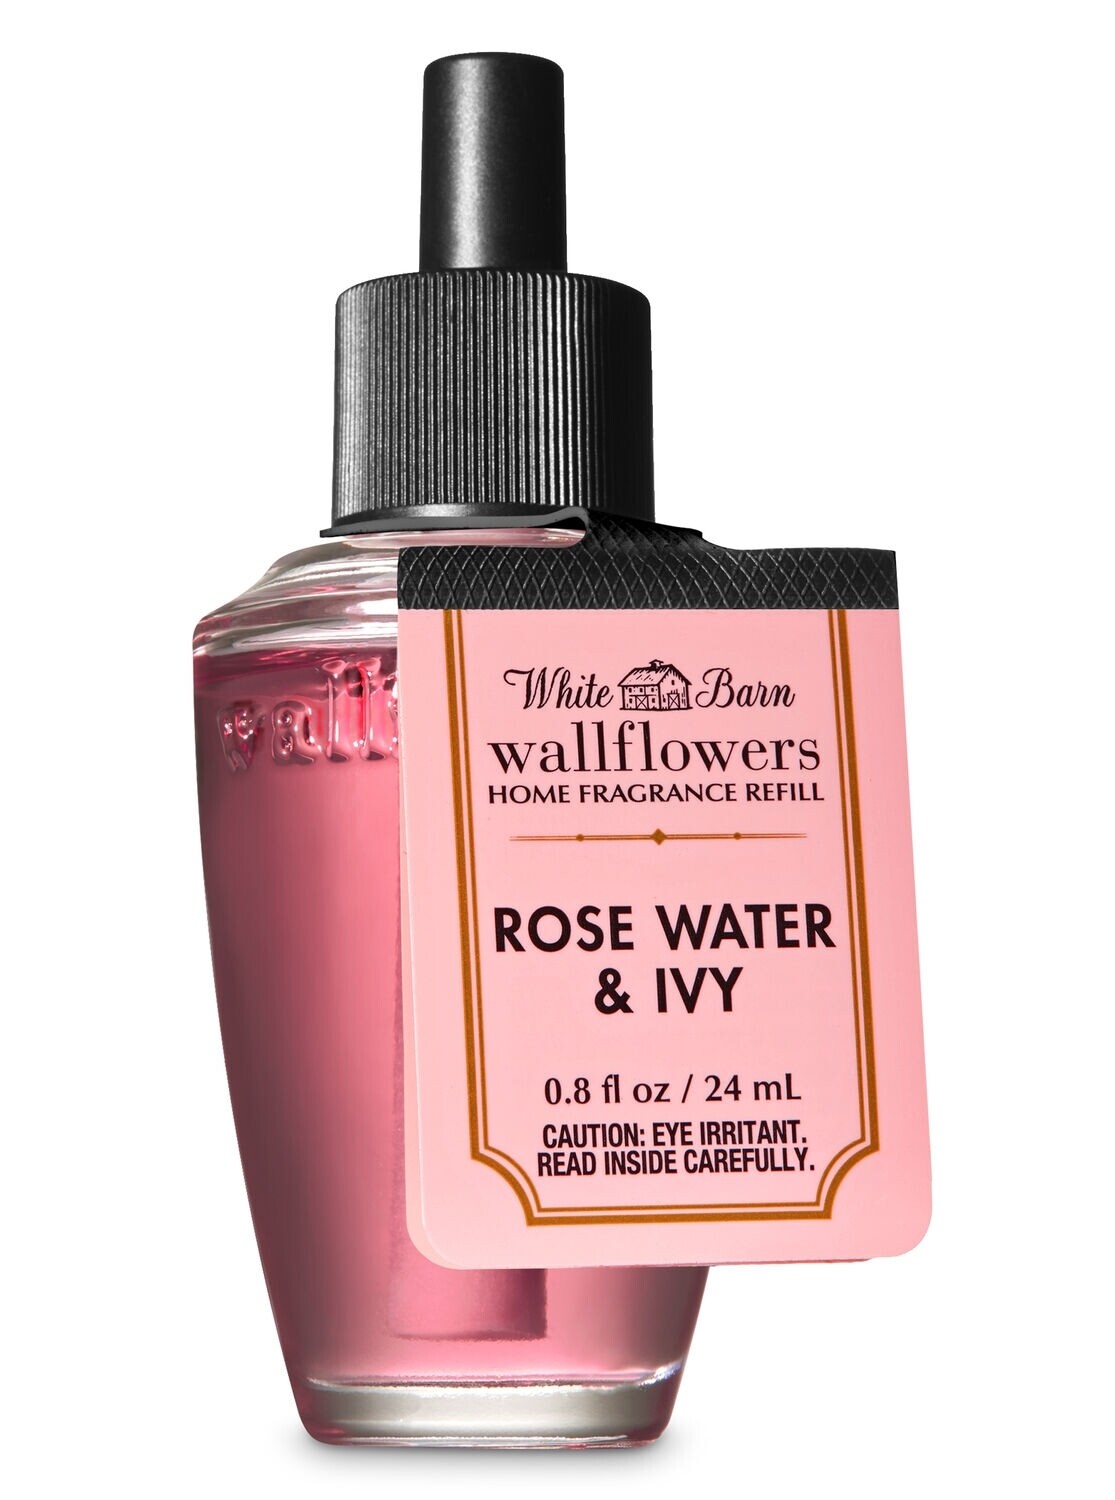 Bath and body works wallflower refill- rose water and ivy